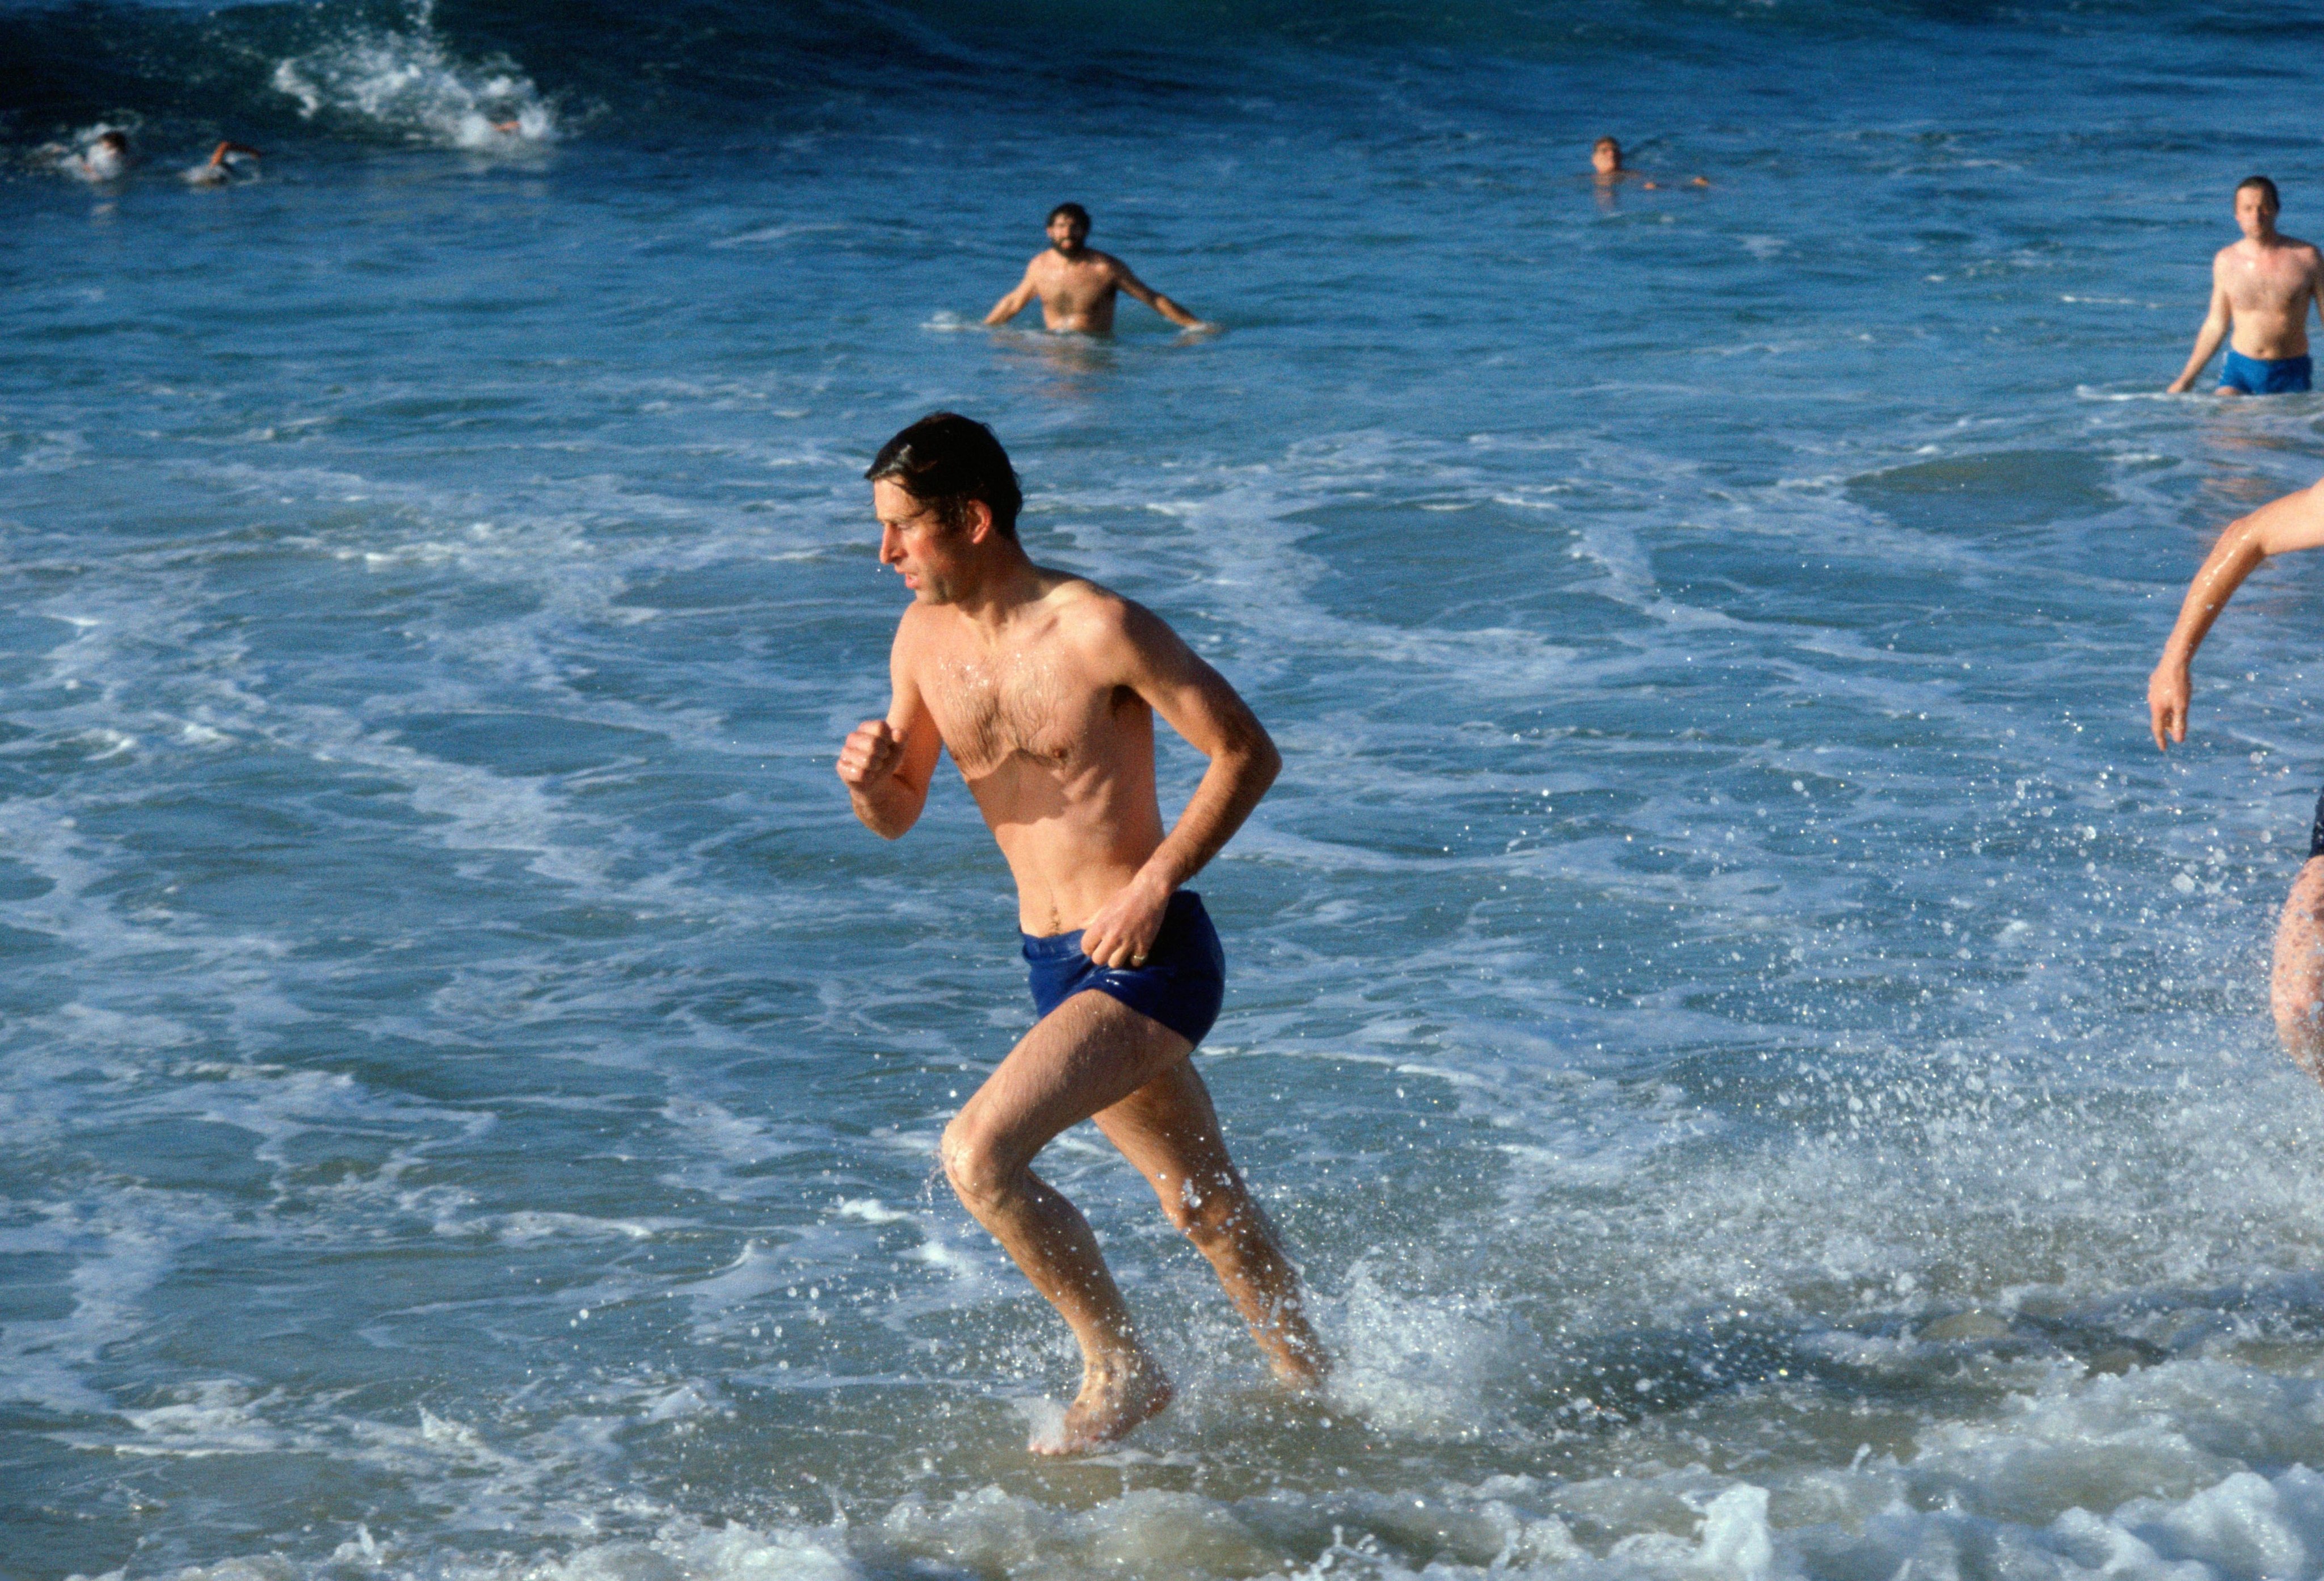 Prince Charles, Prince of Wales in the sea at Bondi Beach as